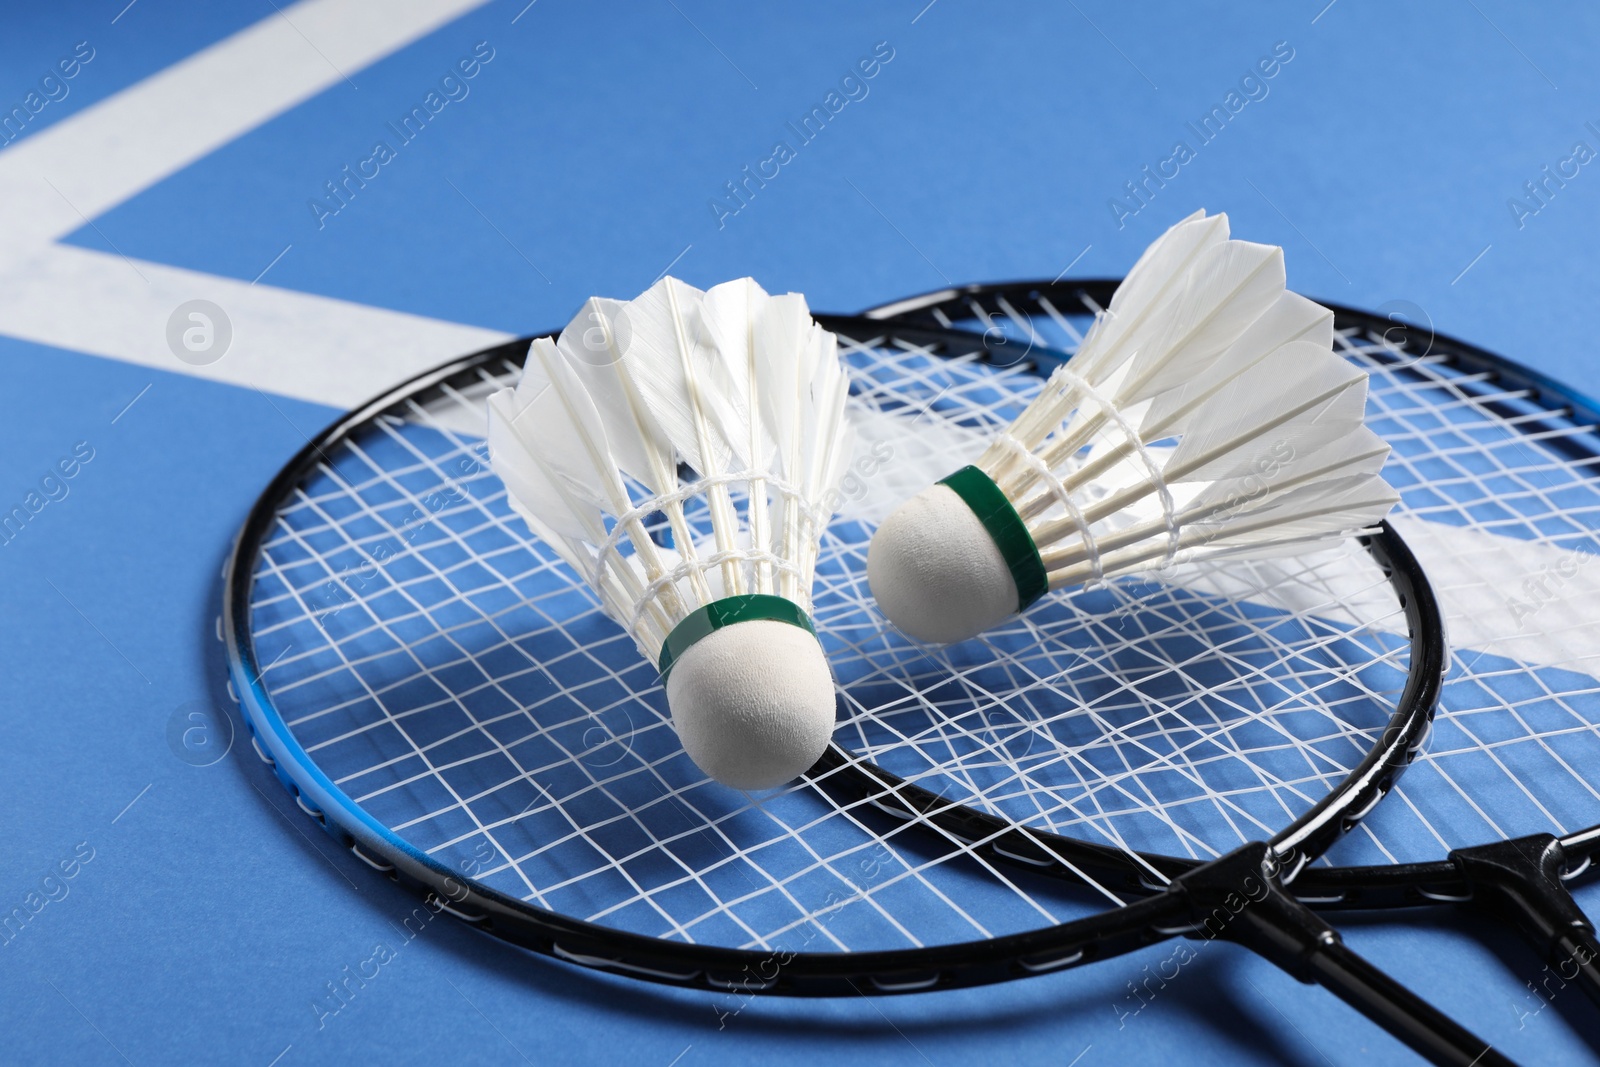 Photo of Feather badminton shuttlecocks and rackets on blue background, closeup